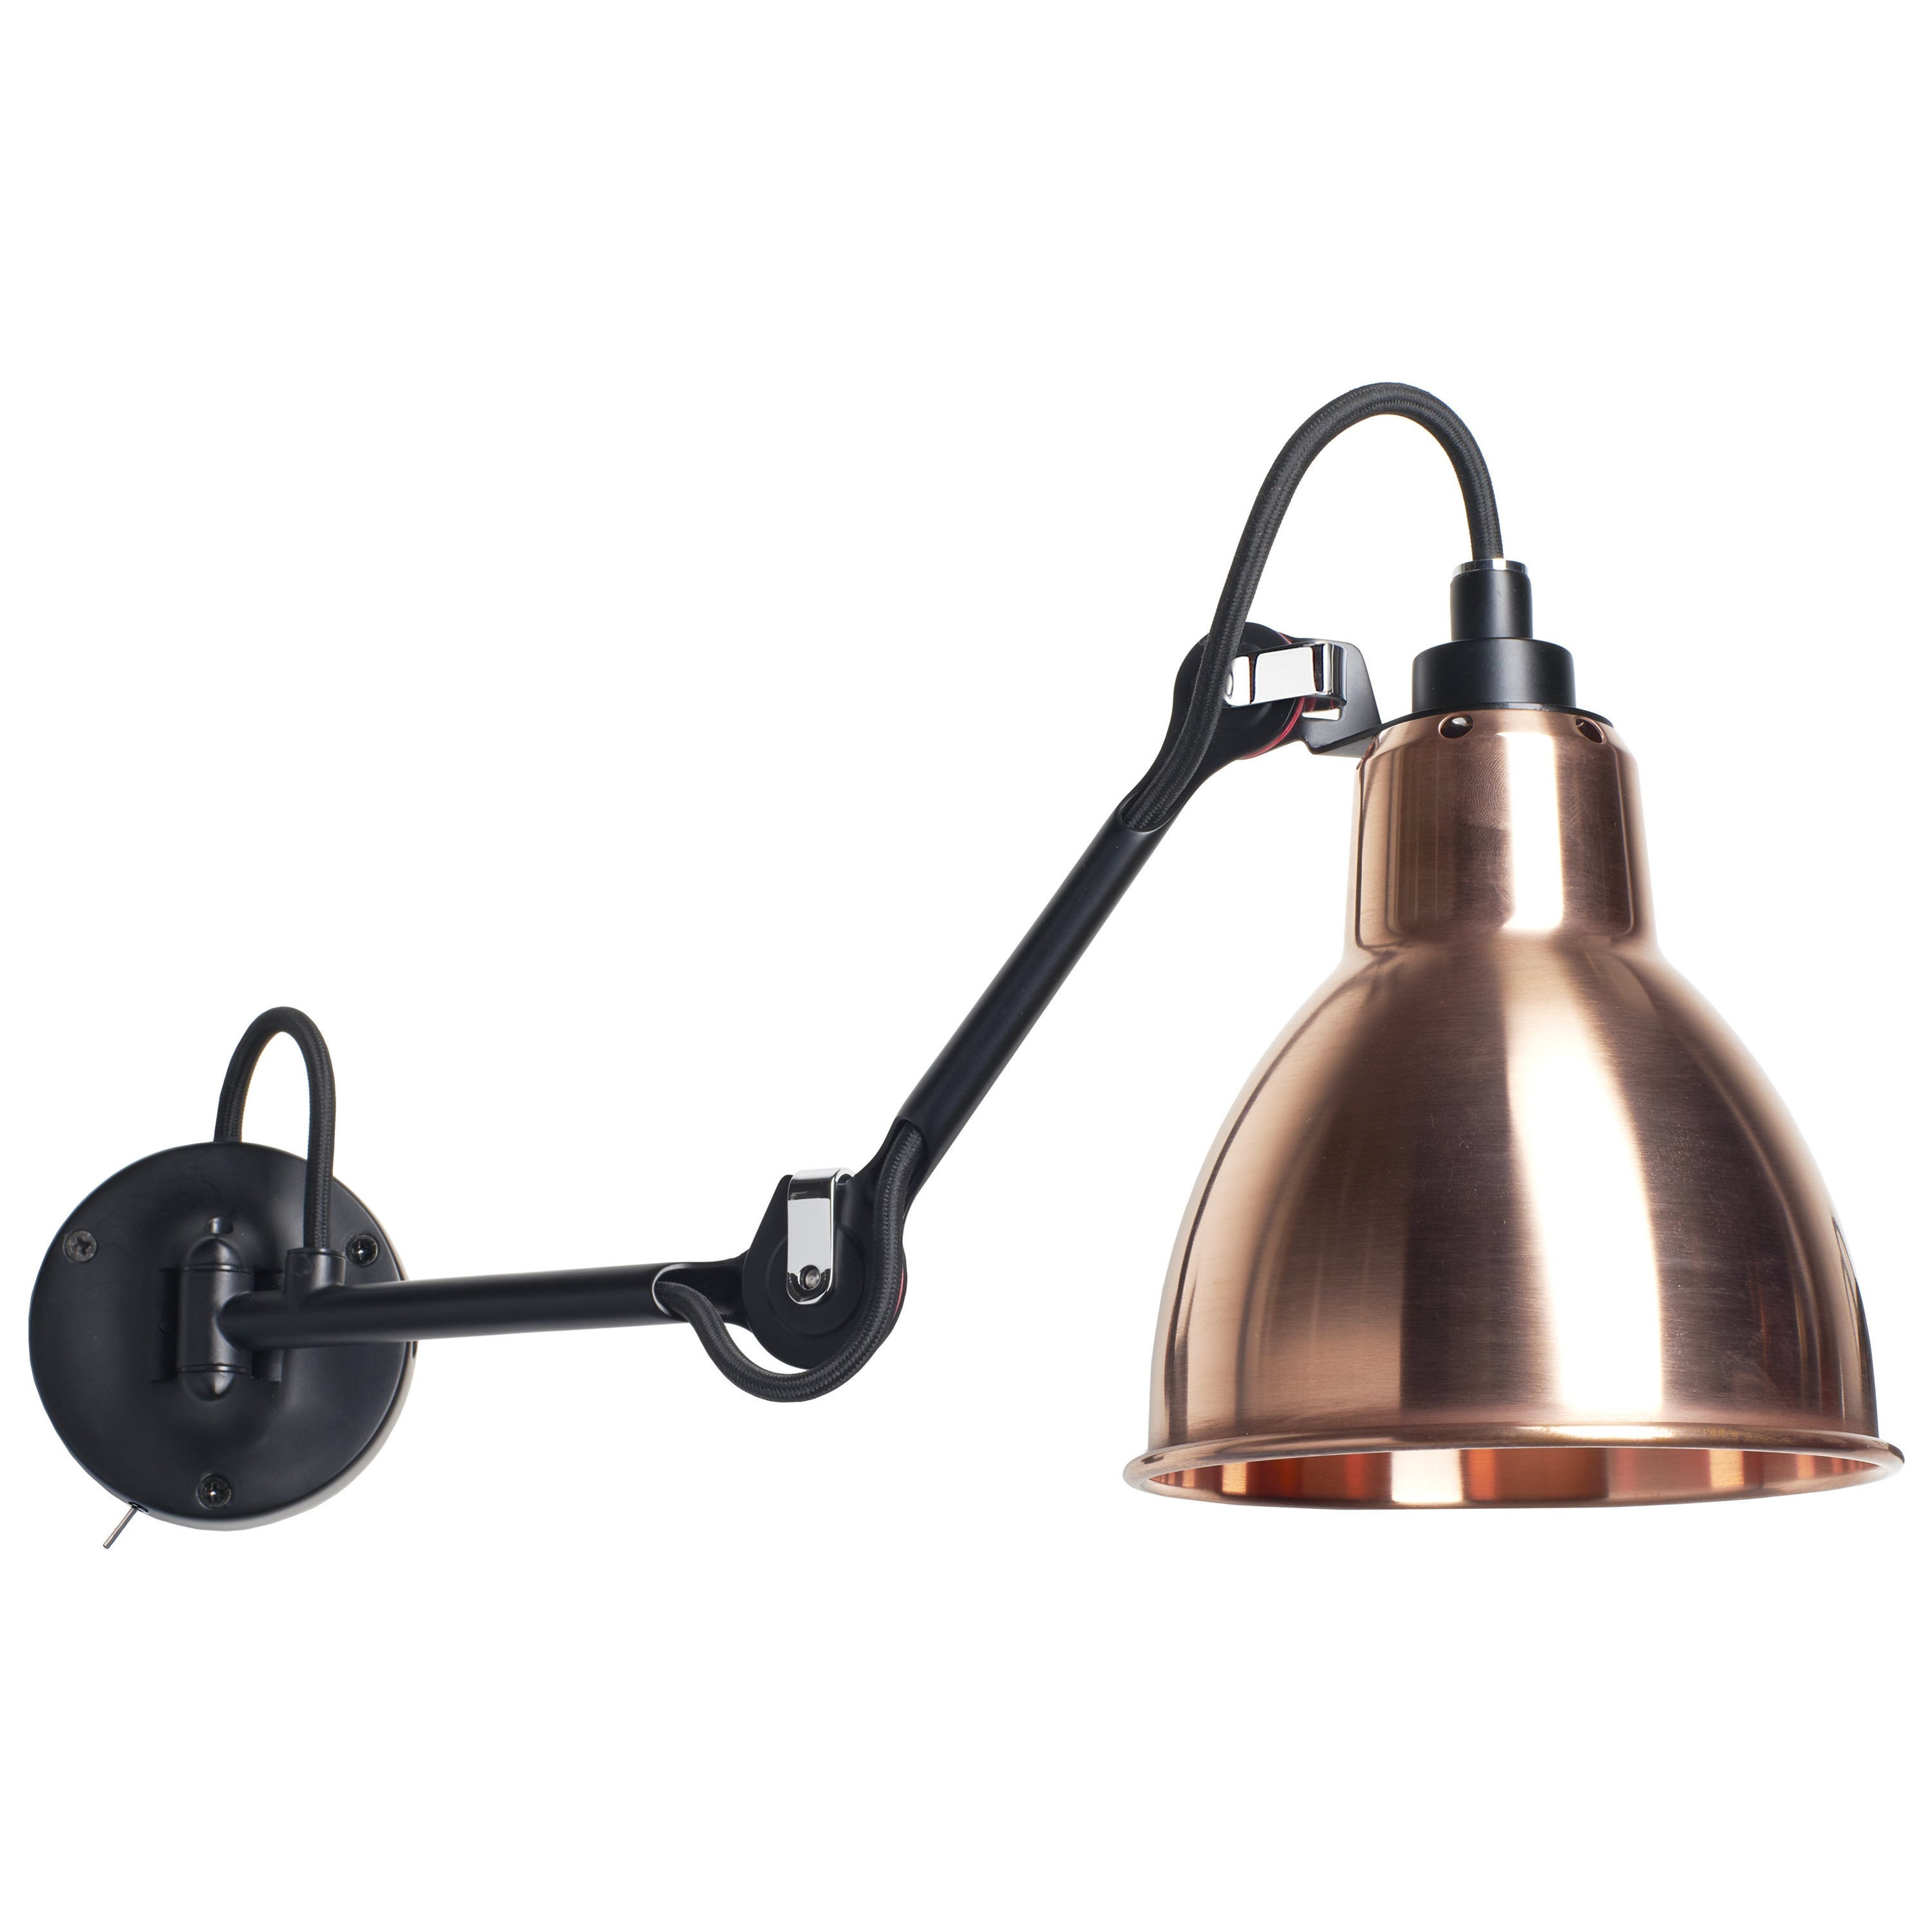 DCW Editions La Lampe Gras N°204 SW Wall Lamp in Black Arm & Raw Copper Shade